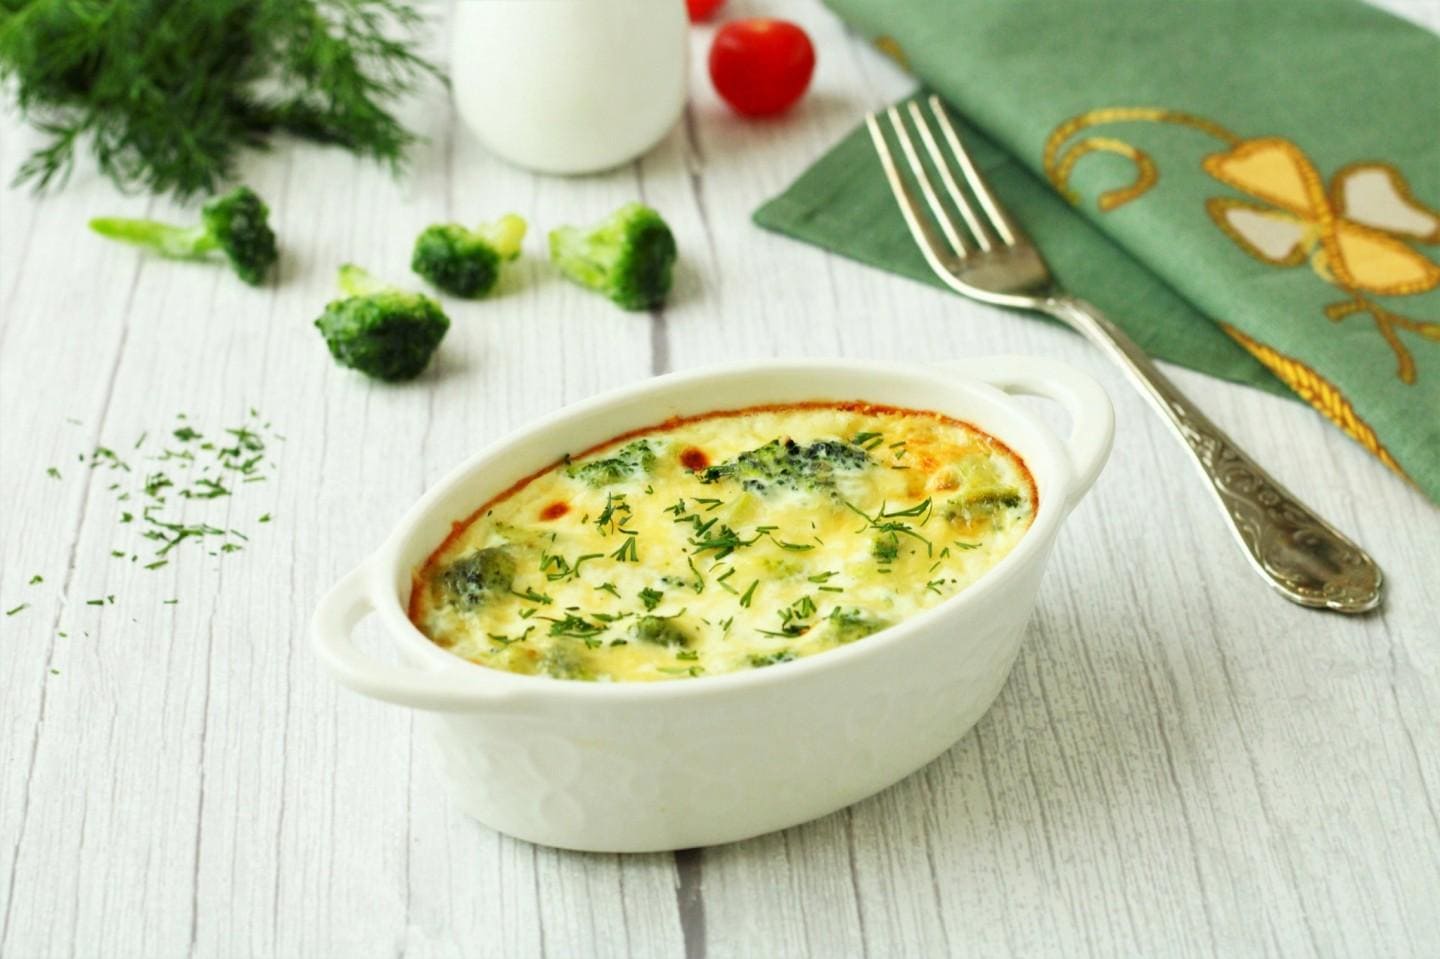 Broccoli and Cheese Casserole - Delicious and Nutritious